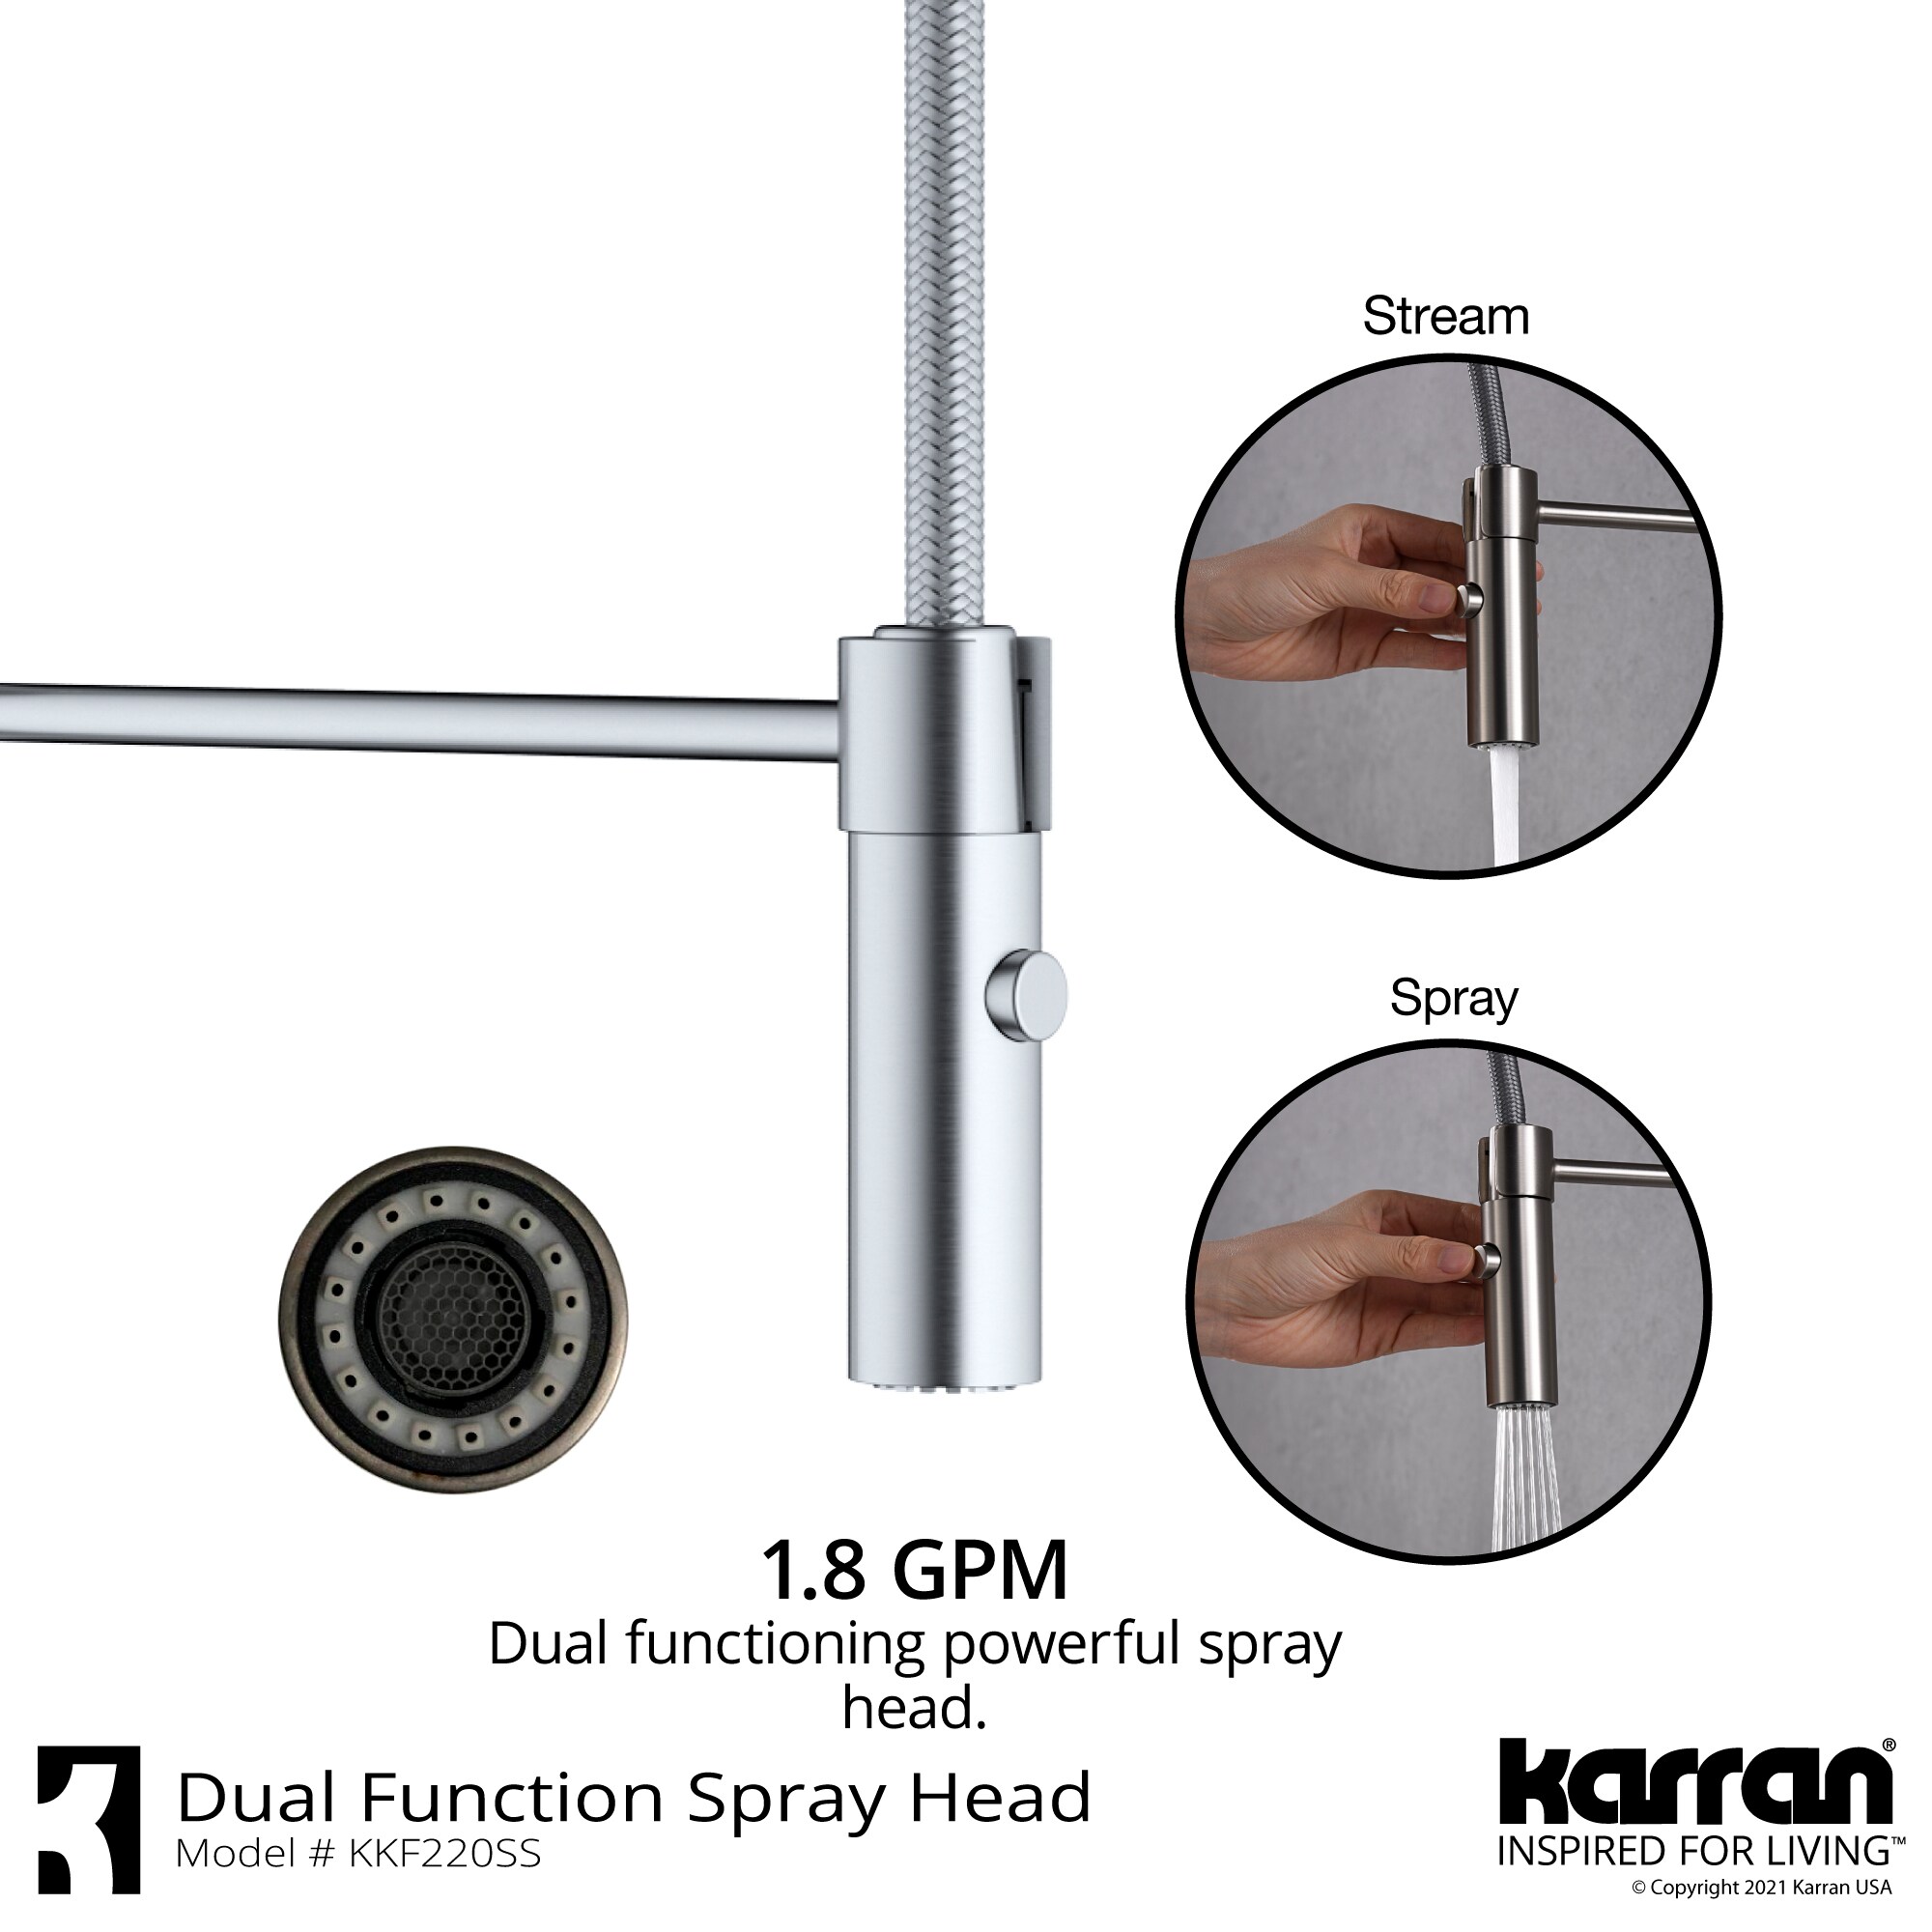 Karran Bluffton Stainless Steel Single Handle Pull-down Kitchen Faucet with Sprayer Function